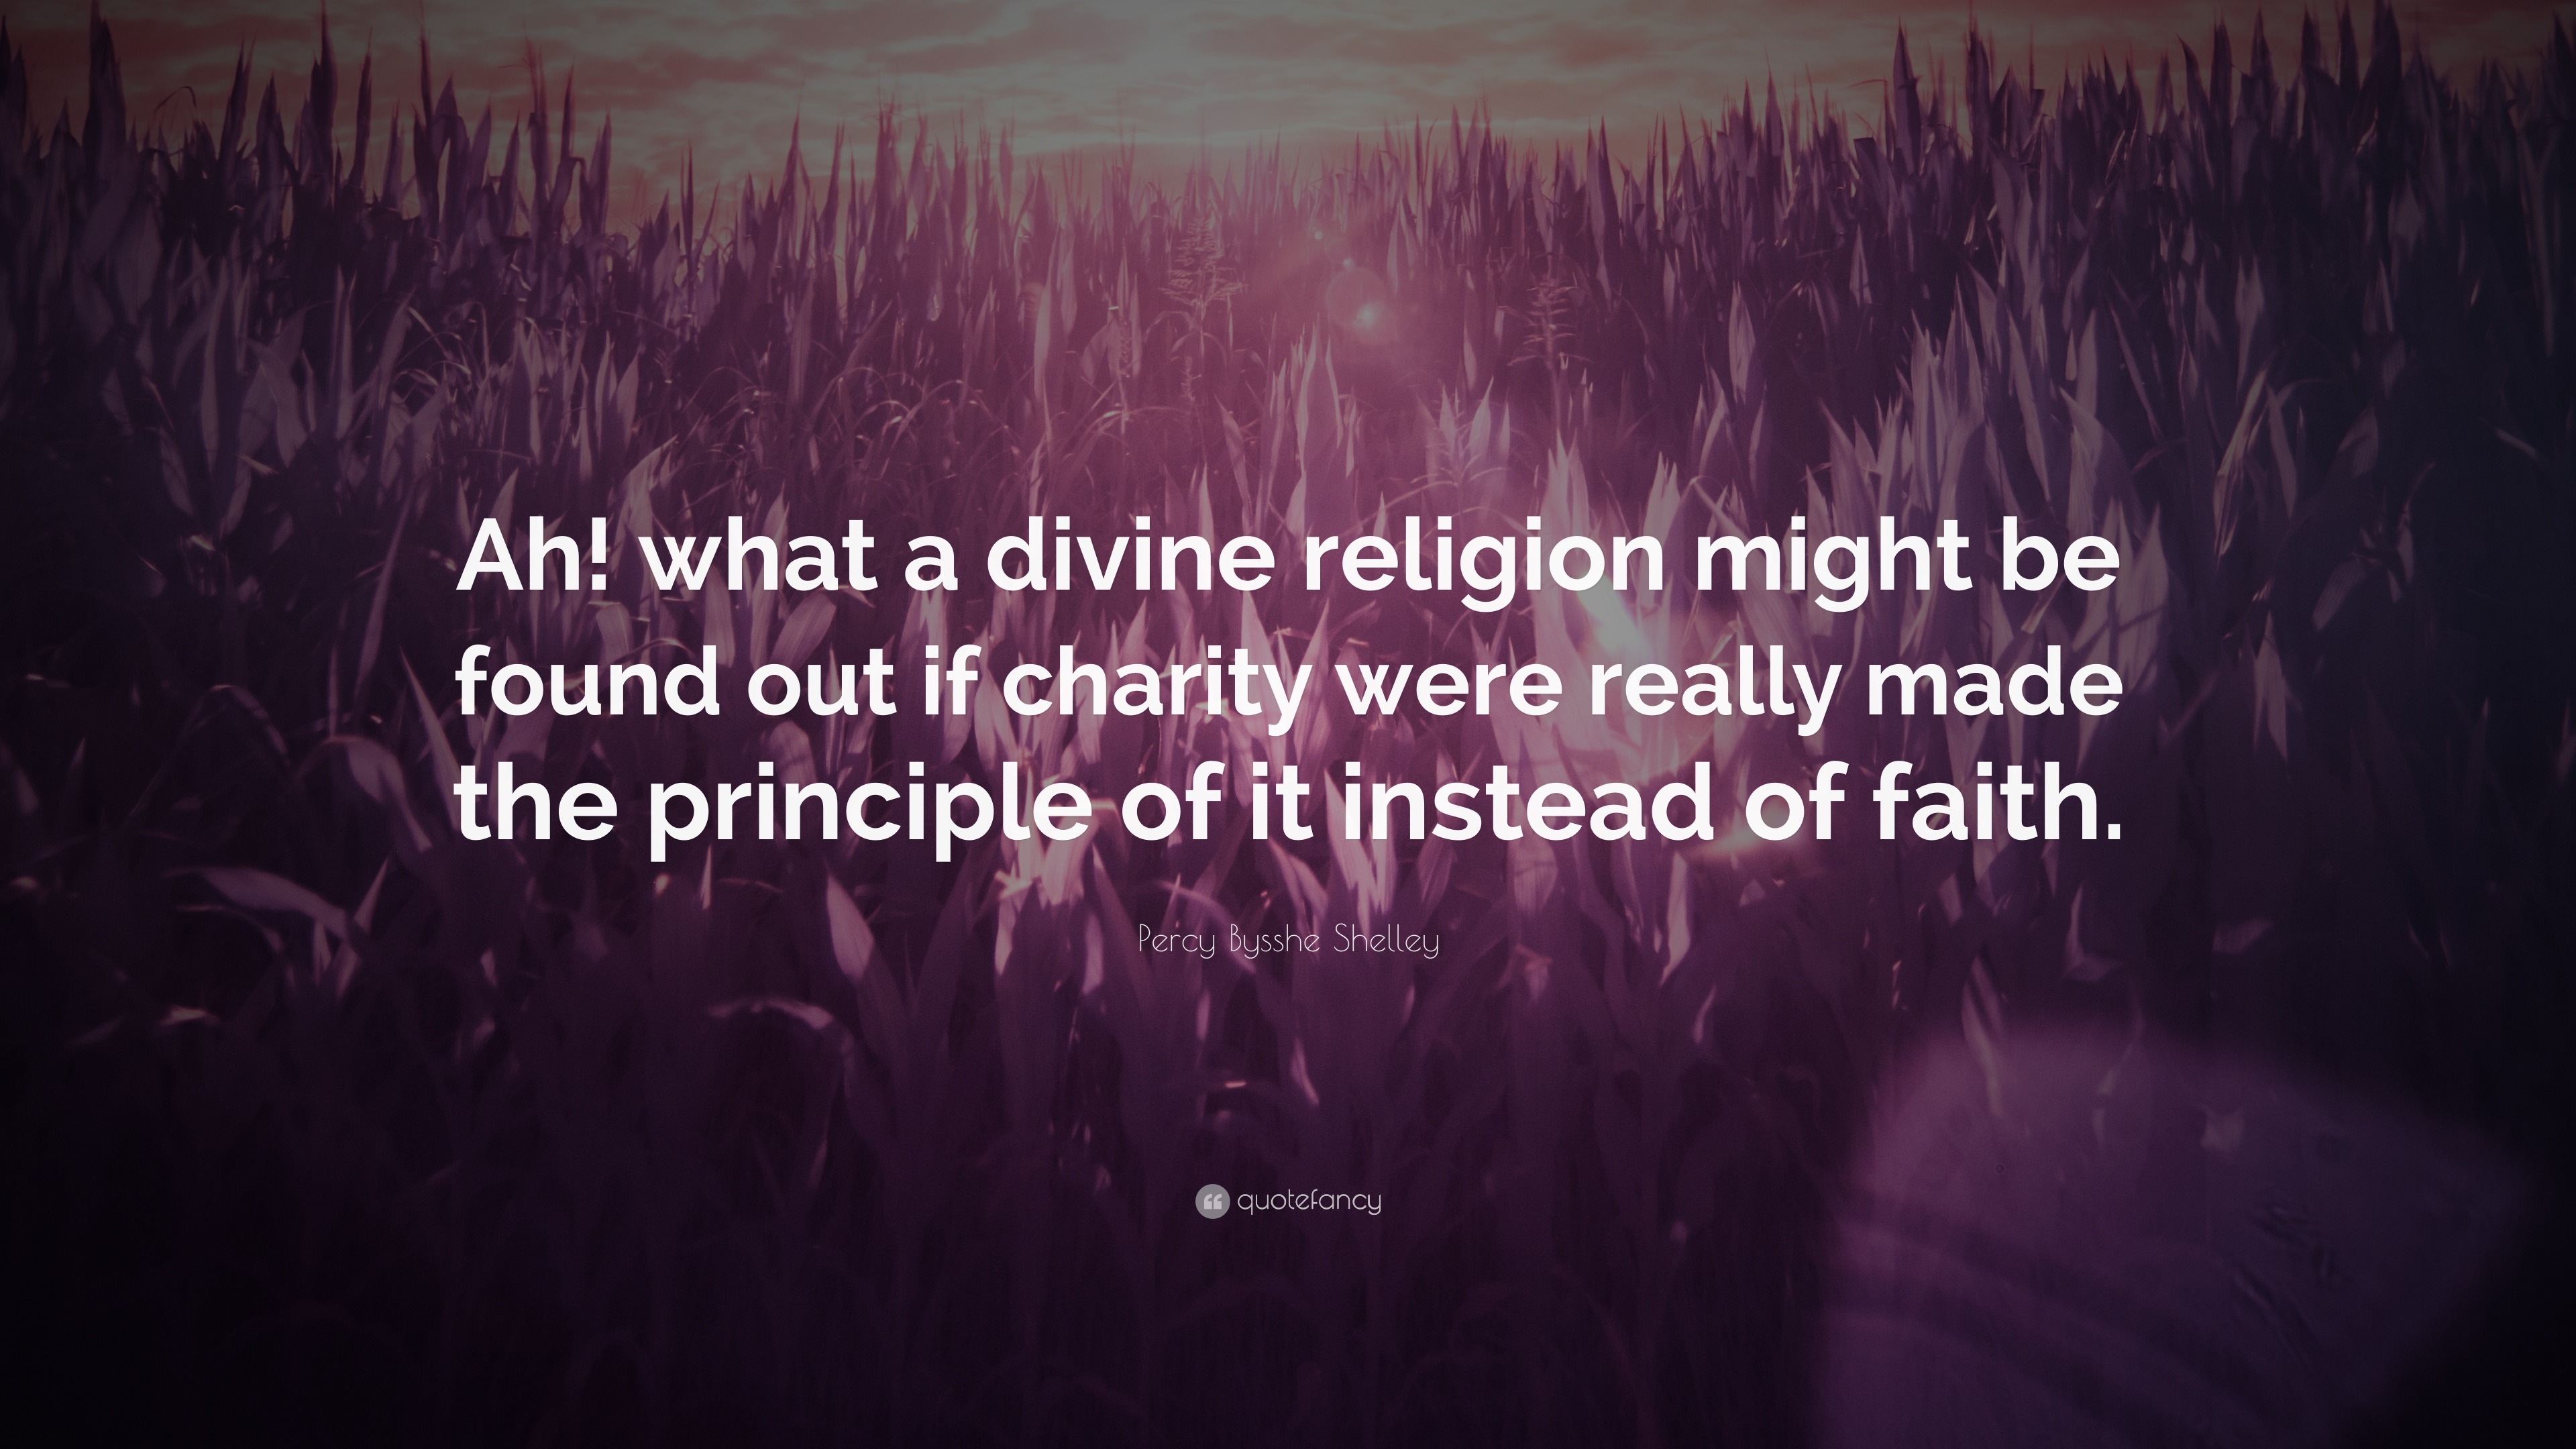 Percy Bysshe Shelley Quote: “Ah! what a divine religion might be found ...